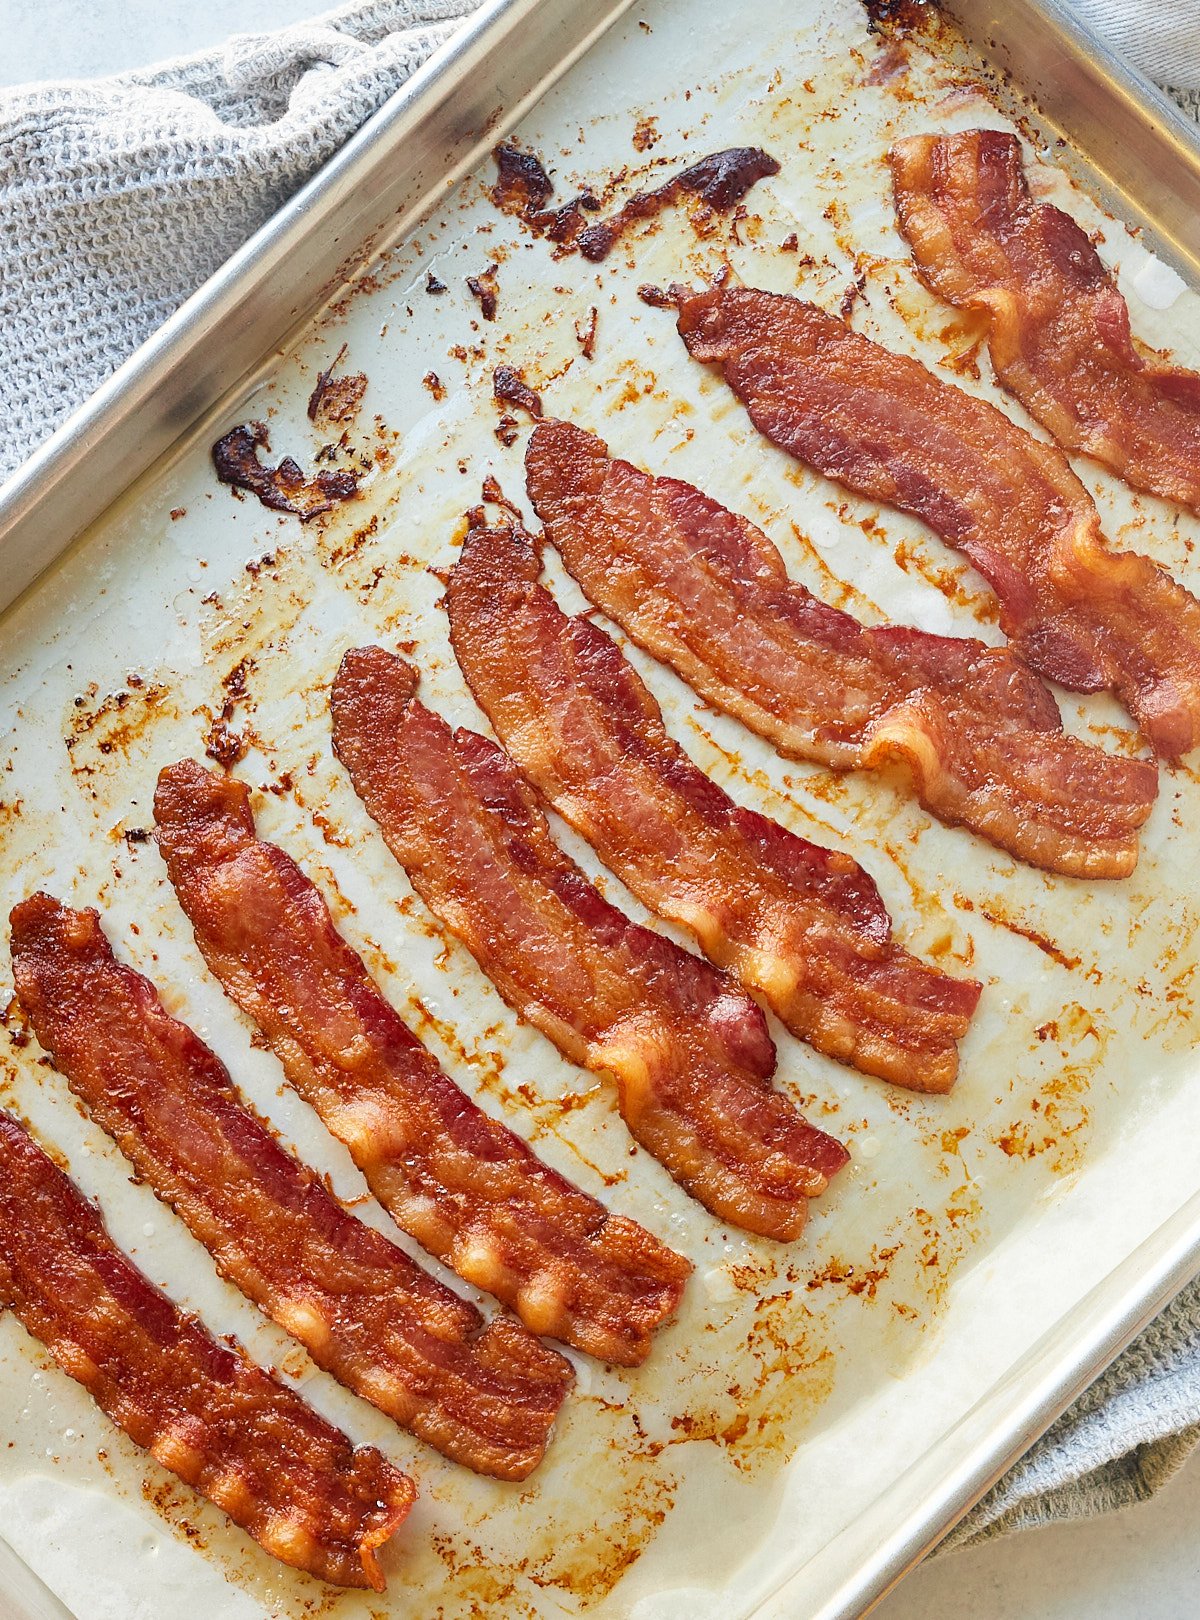 Eight strips of bacon on a baking sheet ready to serve.